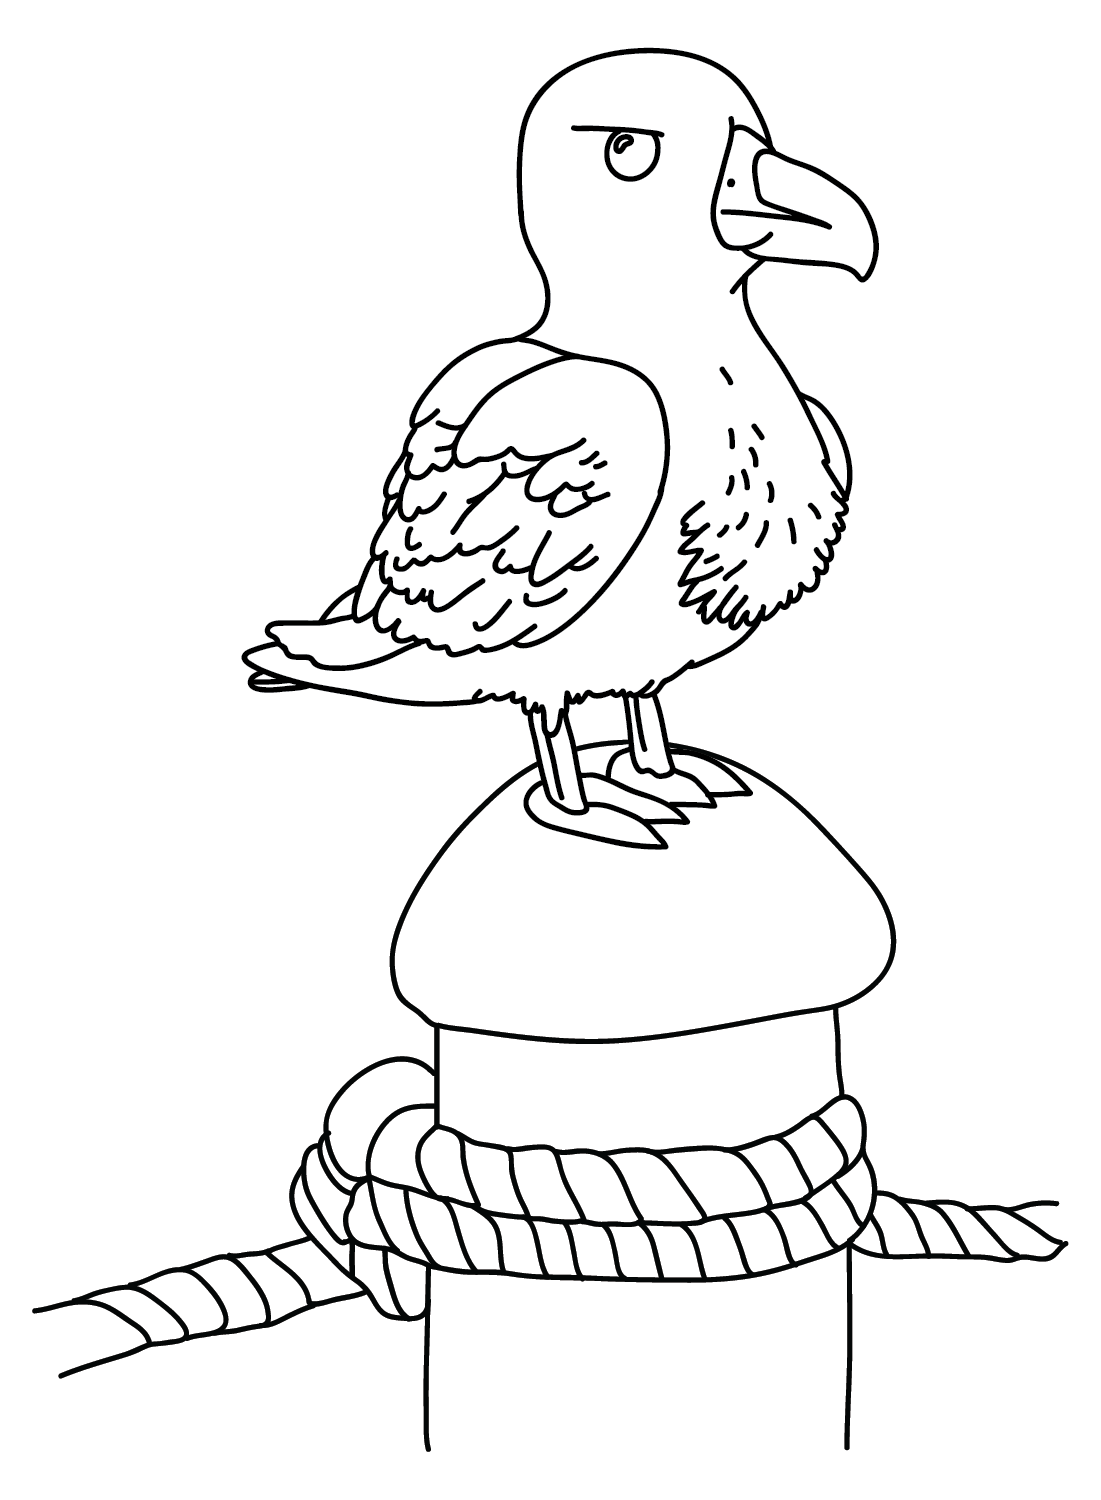 Coloring Page Albatross from Albatross